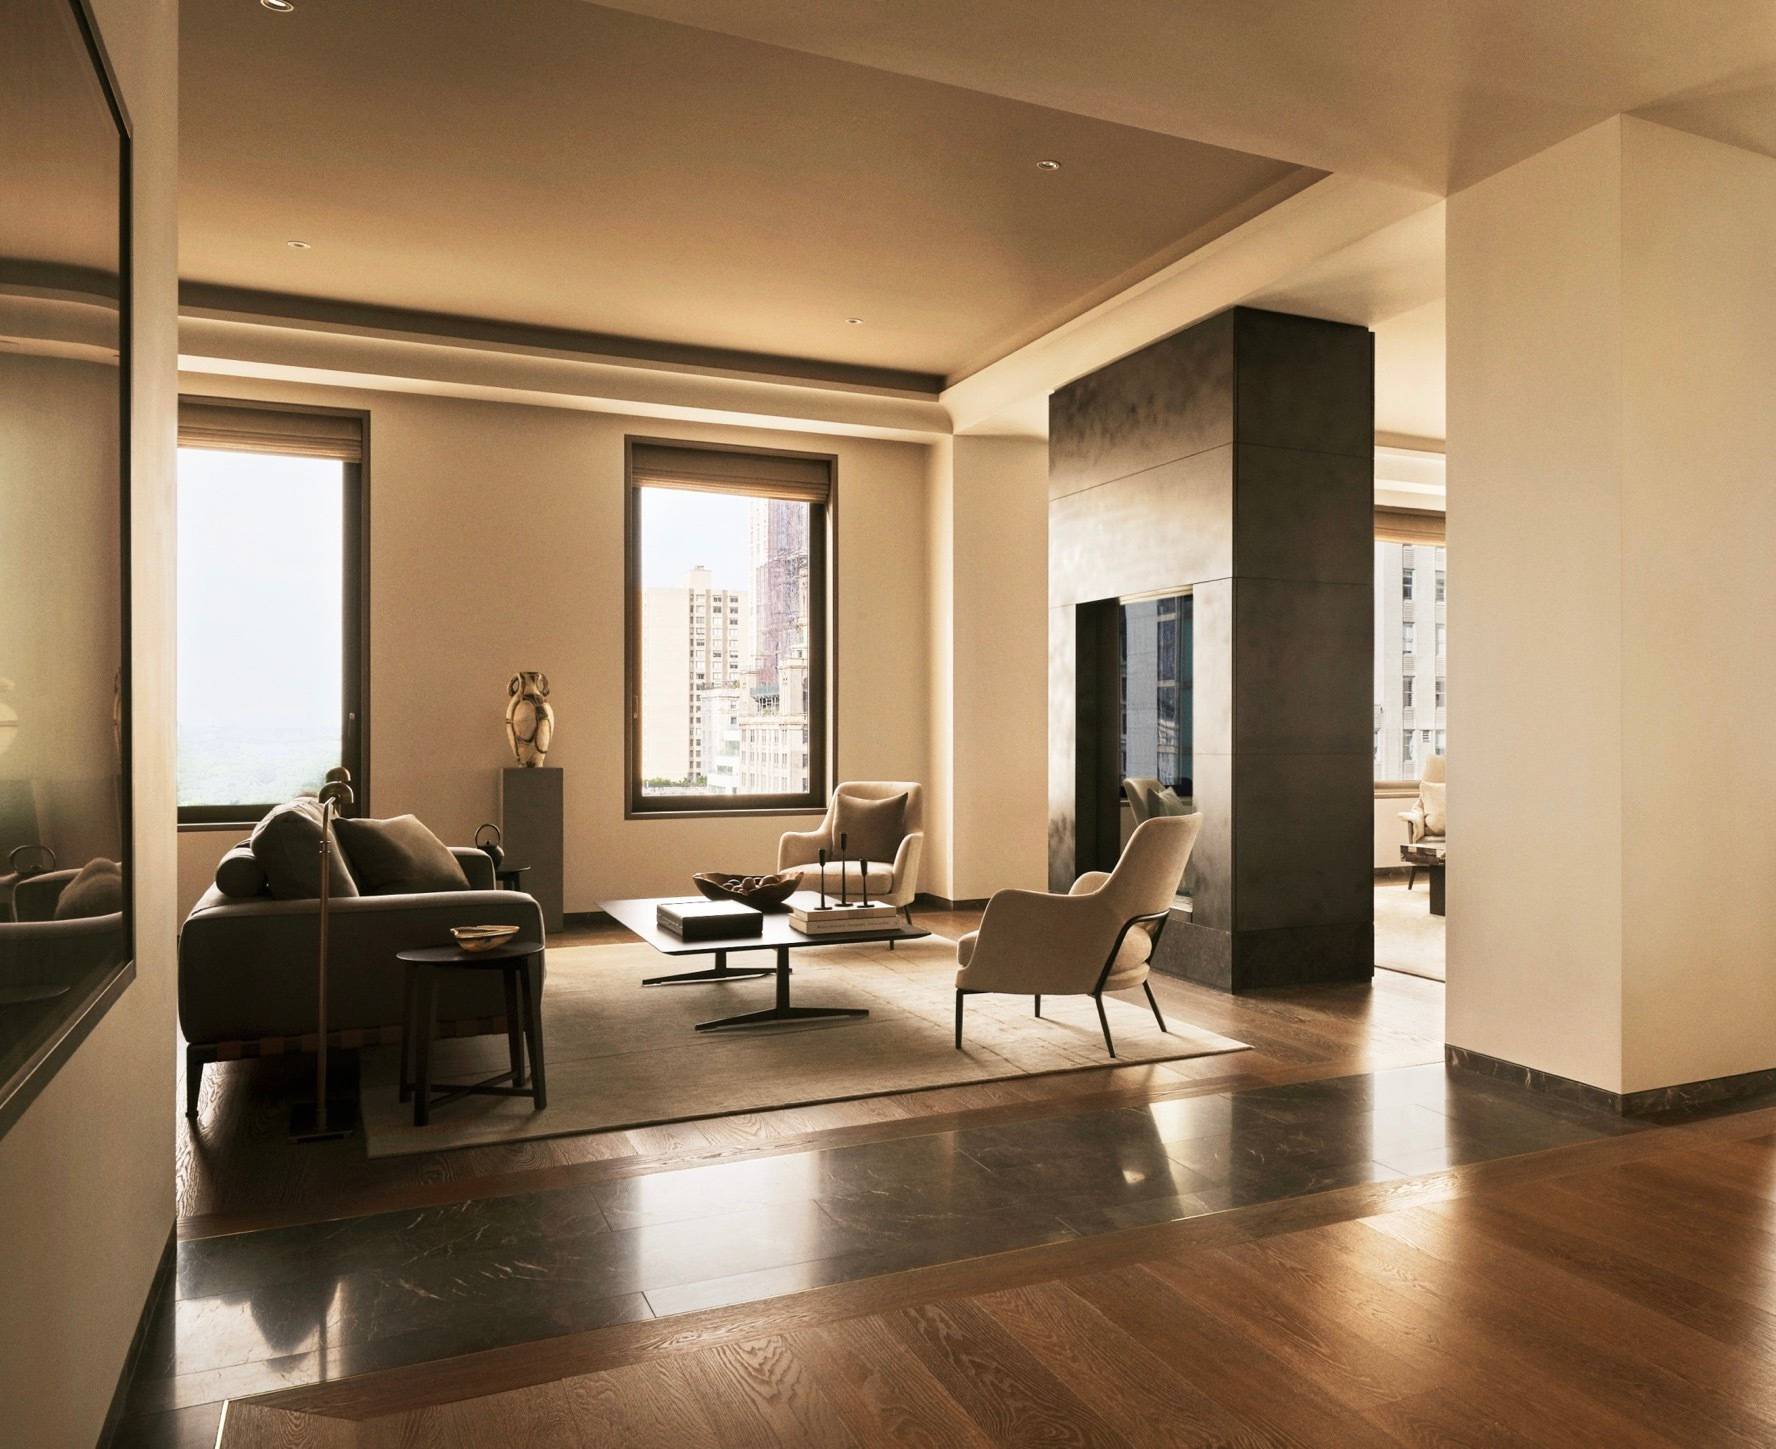 16B, Aman New York is a two bedroom residence located at the crossroads of Fifth Avenue and 57th Street within the iconic Crown Building, recently reopened as Aman New York.